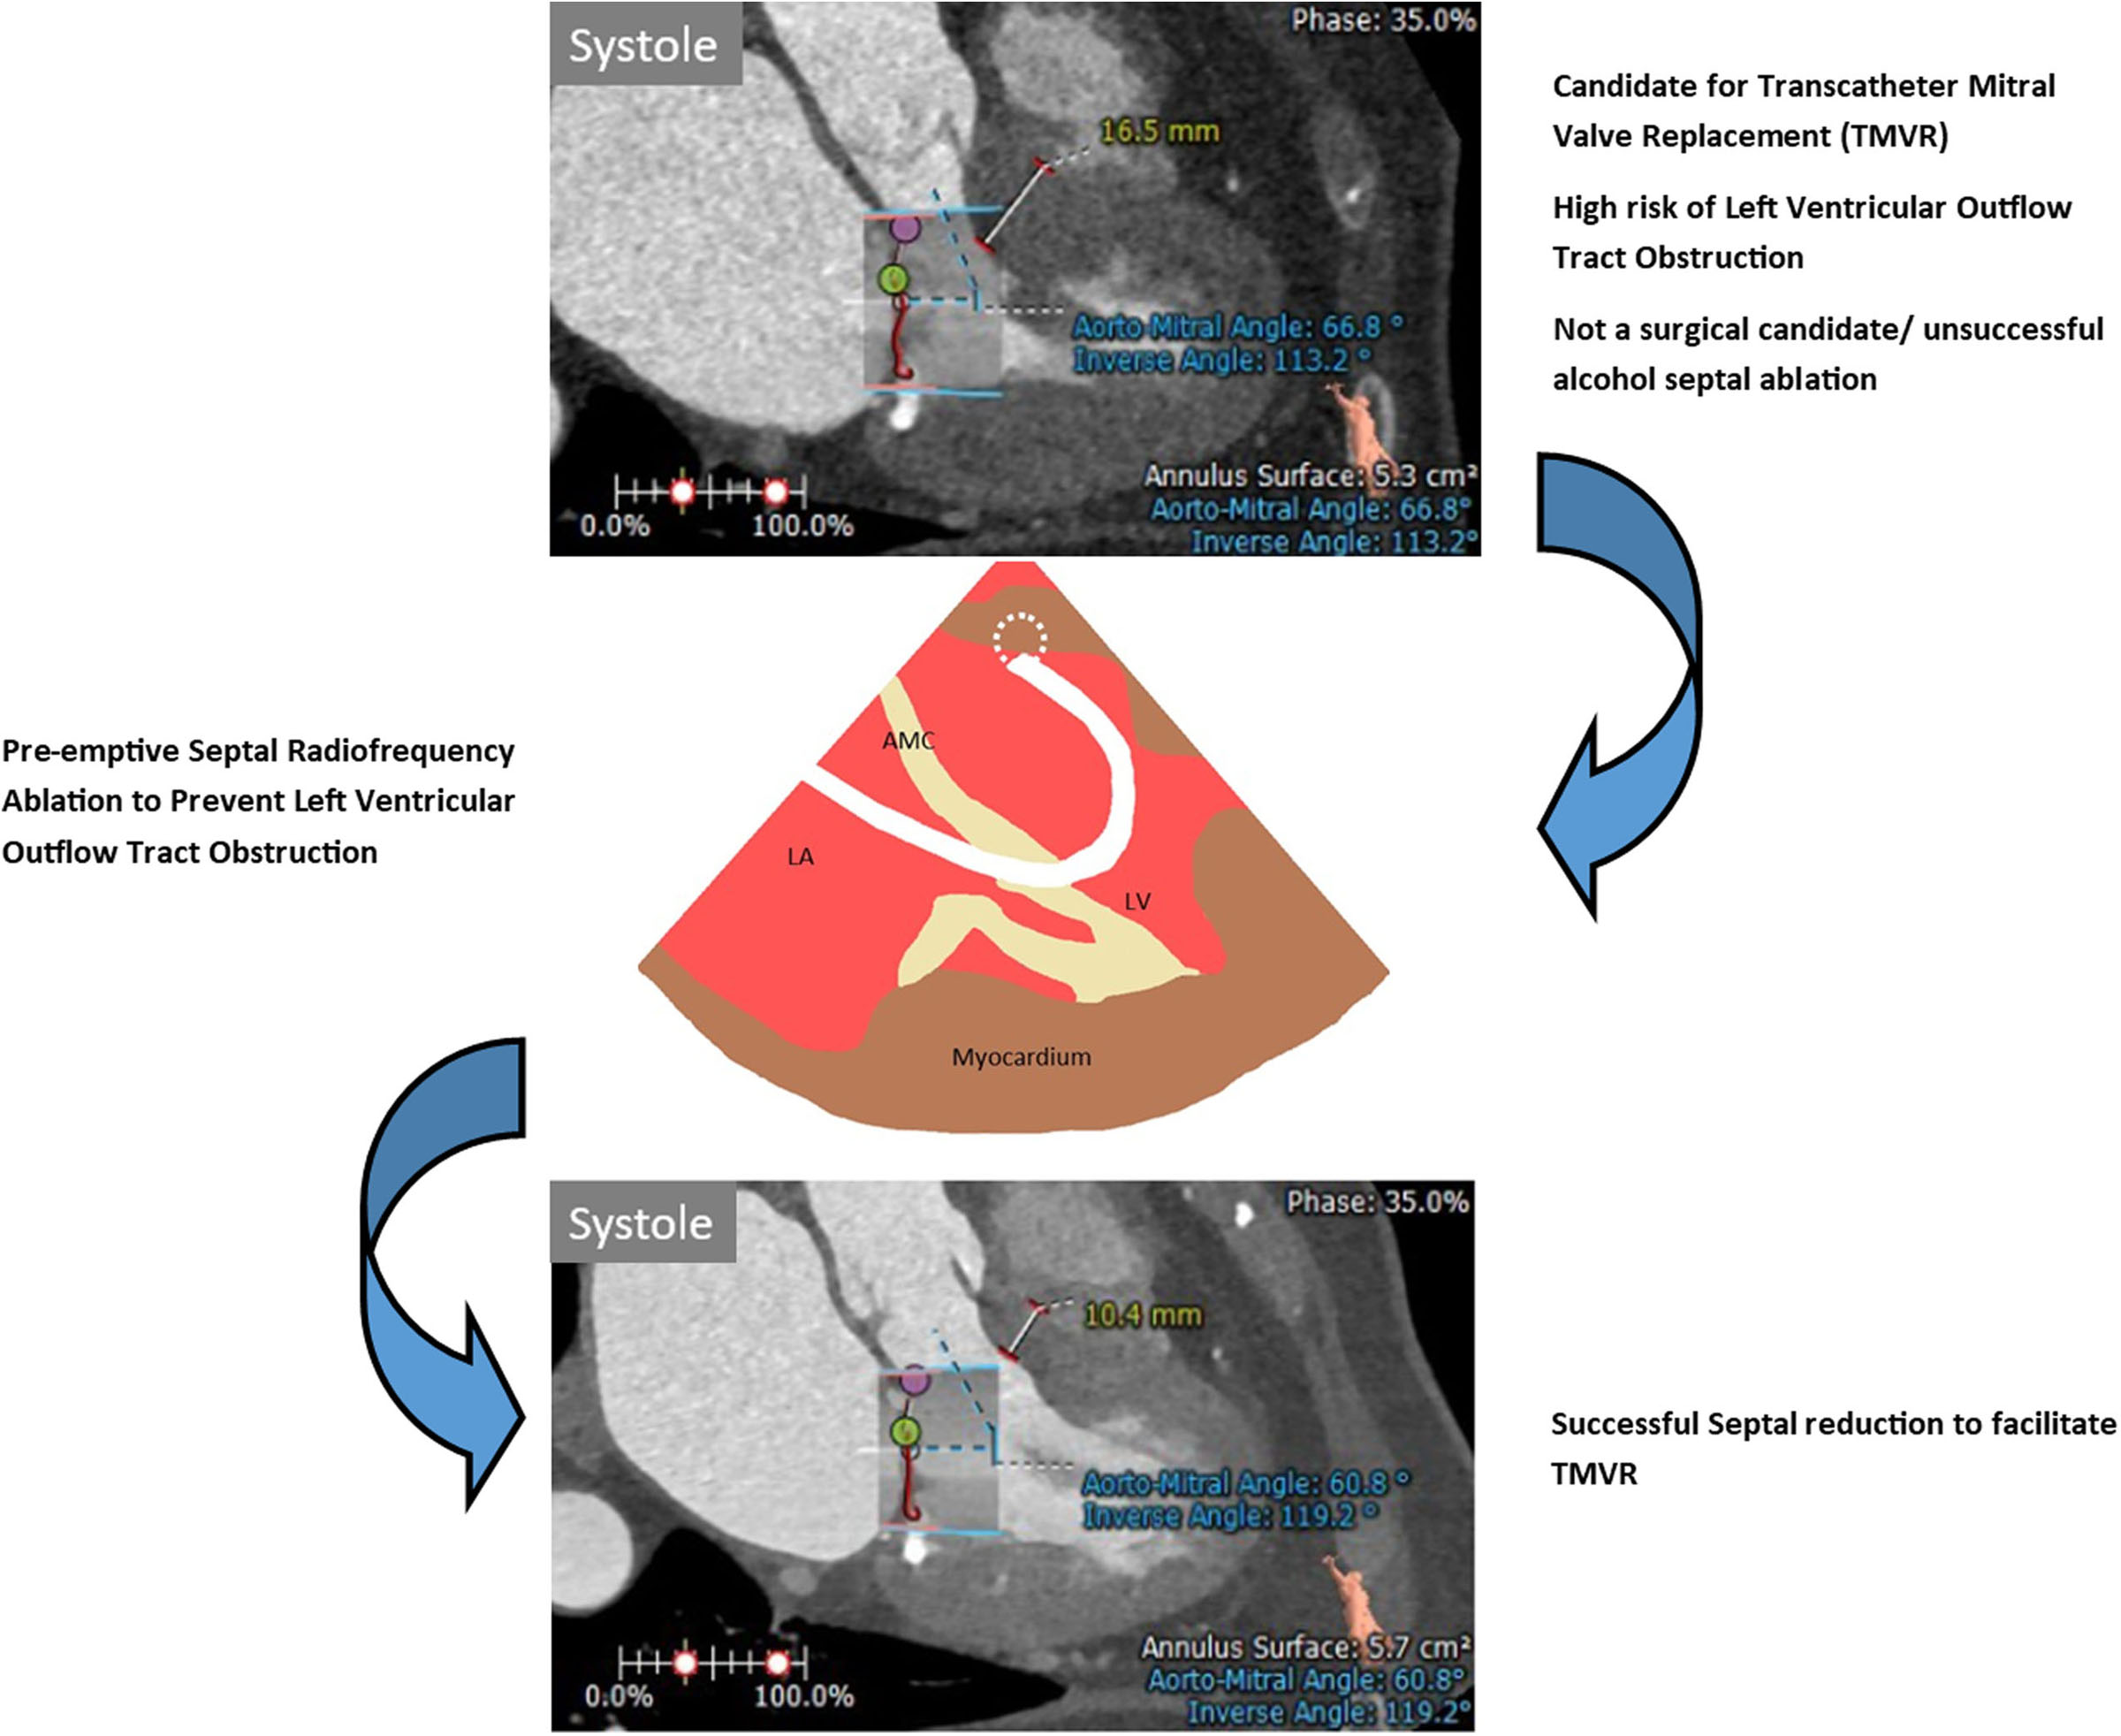 Preemptive Septal Radiofrequency Ablation to Prevent Left Ventricular Outflow Tract Obstruction With Transcatheter Mitral Valve Replacement: A Case Series